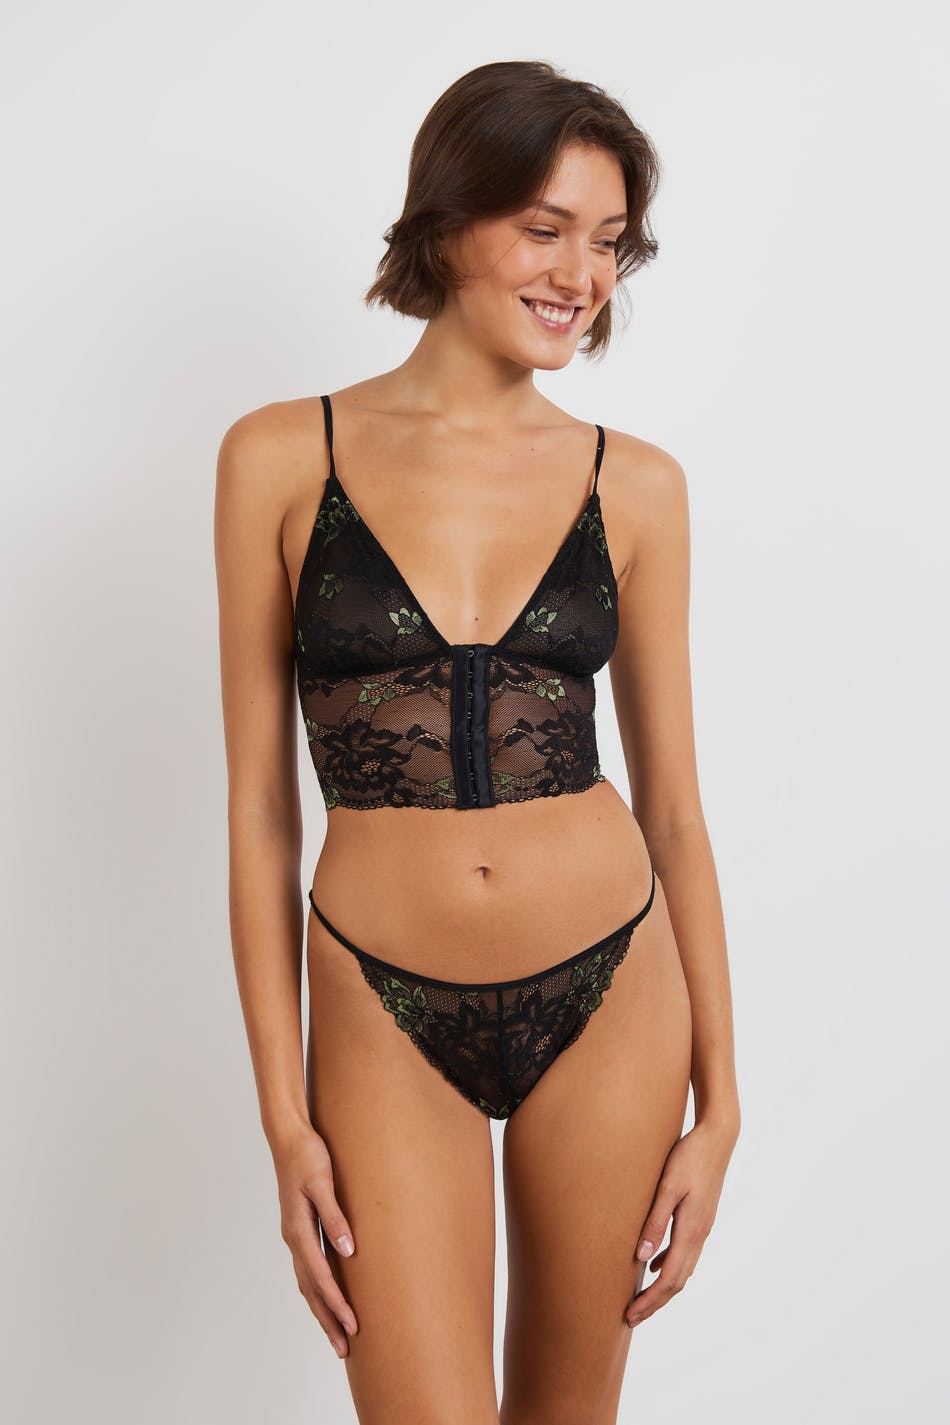 Gina Tricot Kate lace brief  XL  Black/green (9373)